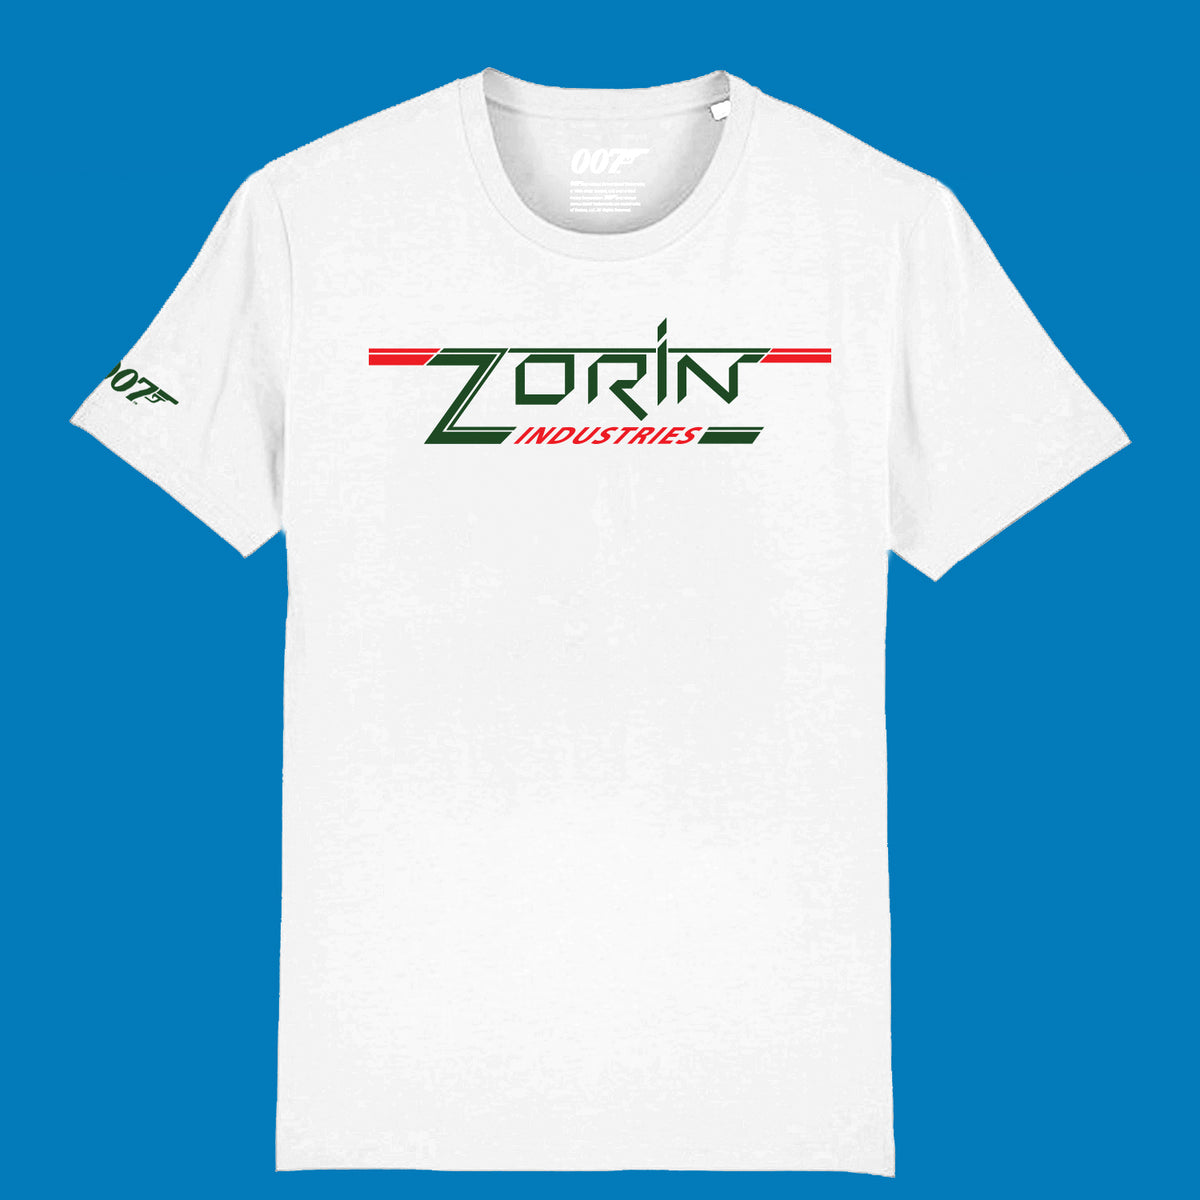 James Bond Zorin Industries Logo T-Shirt - A View To A Kill Edition